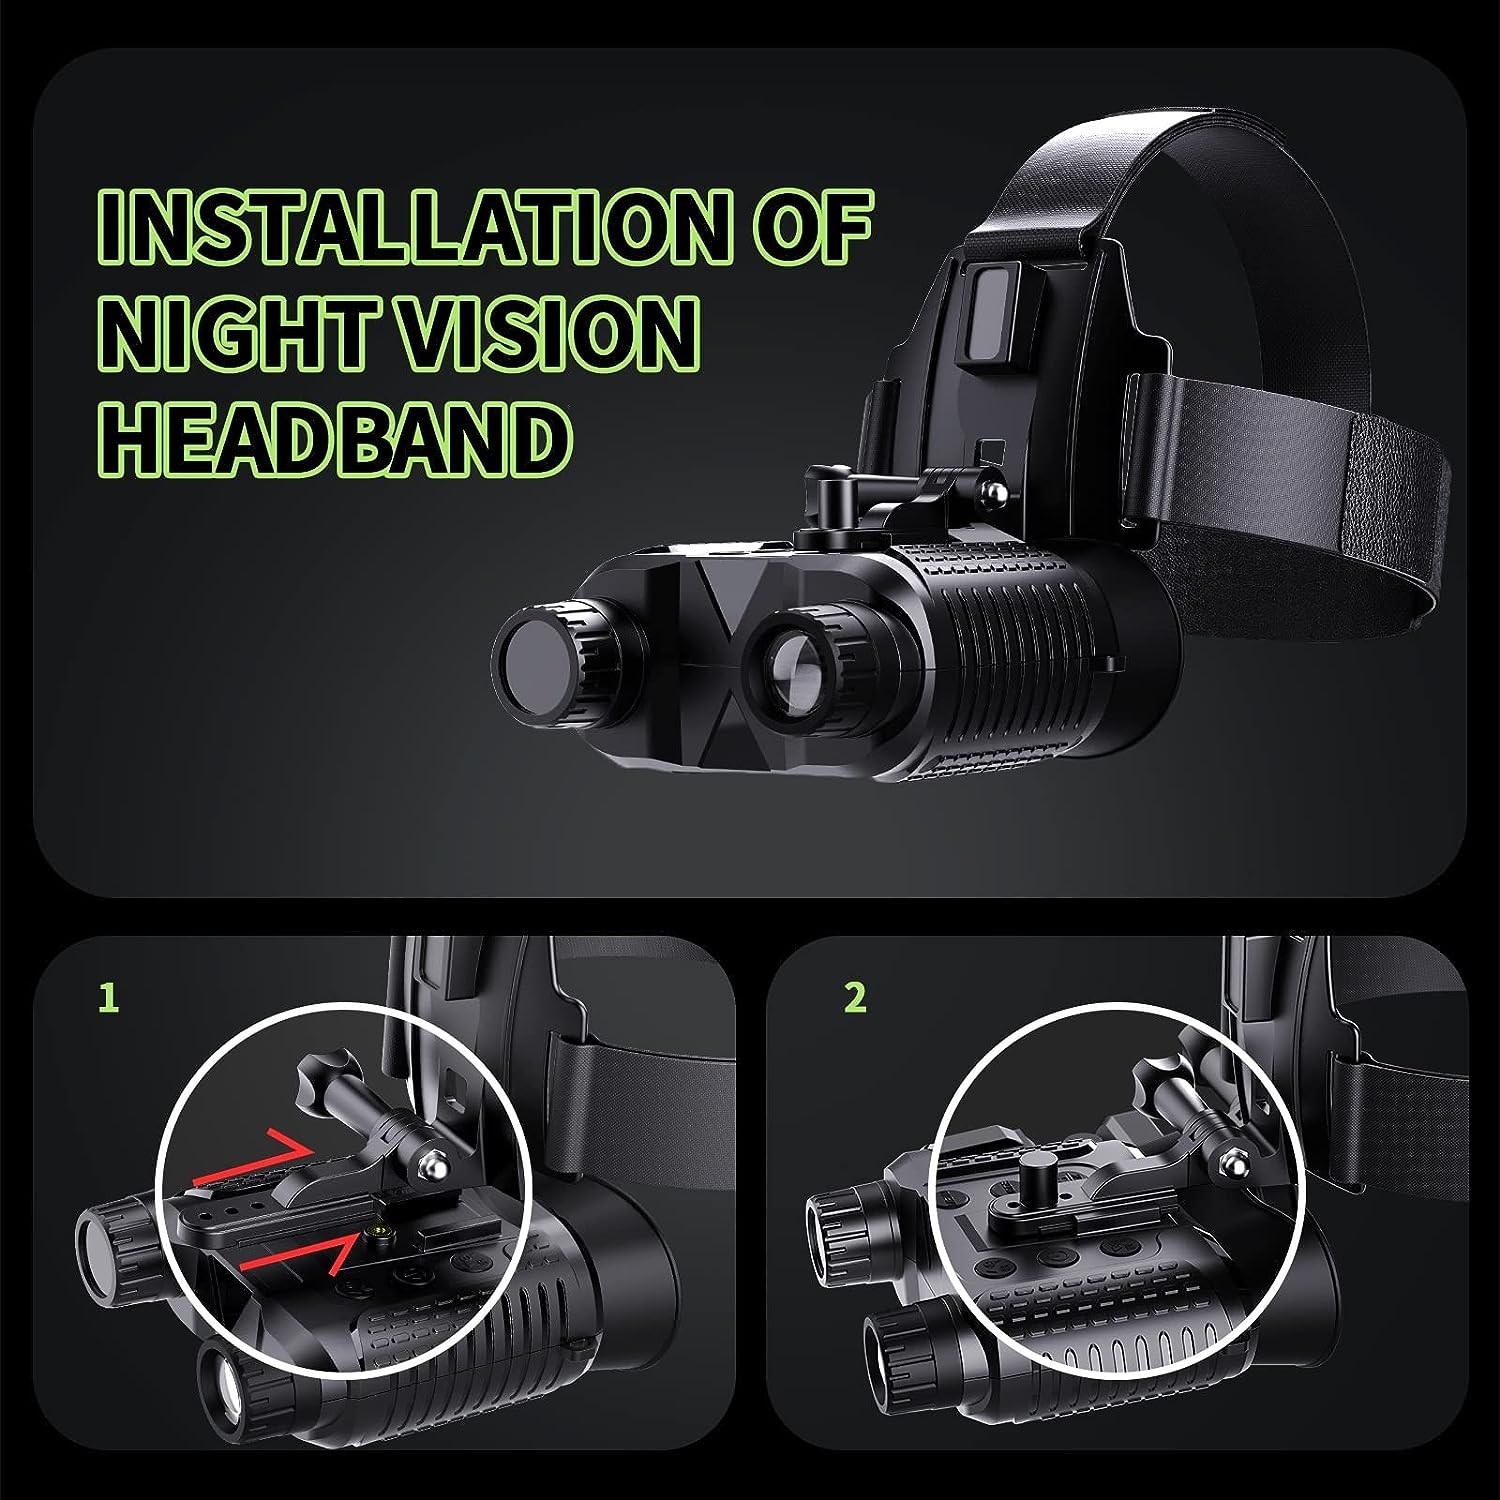 Head-mounted night vision goggles (6)